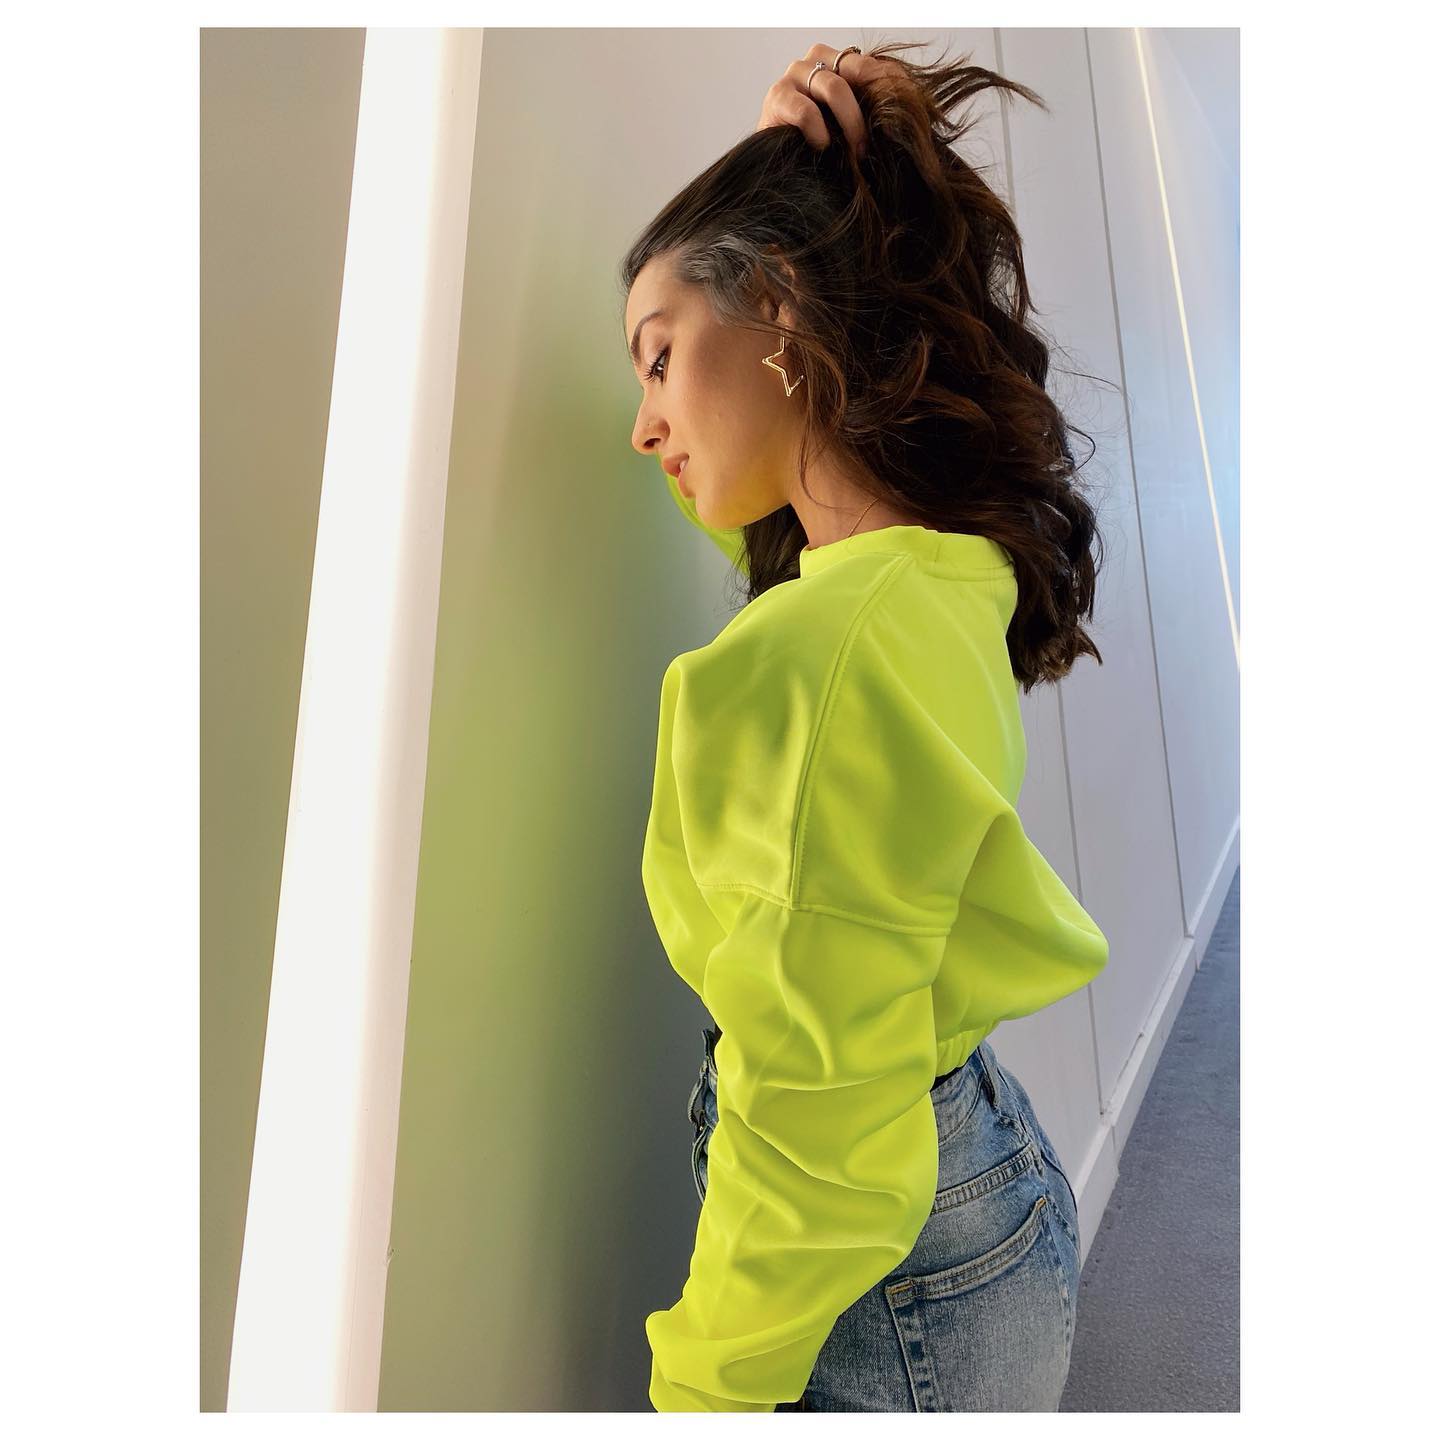 Iqra Aziz in neon outfit